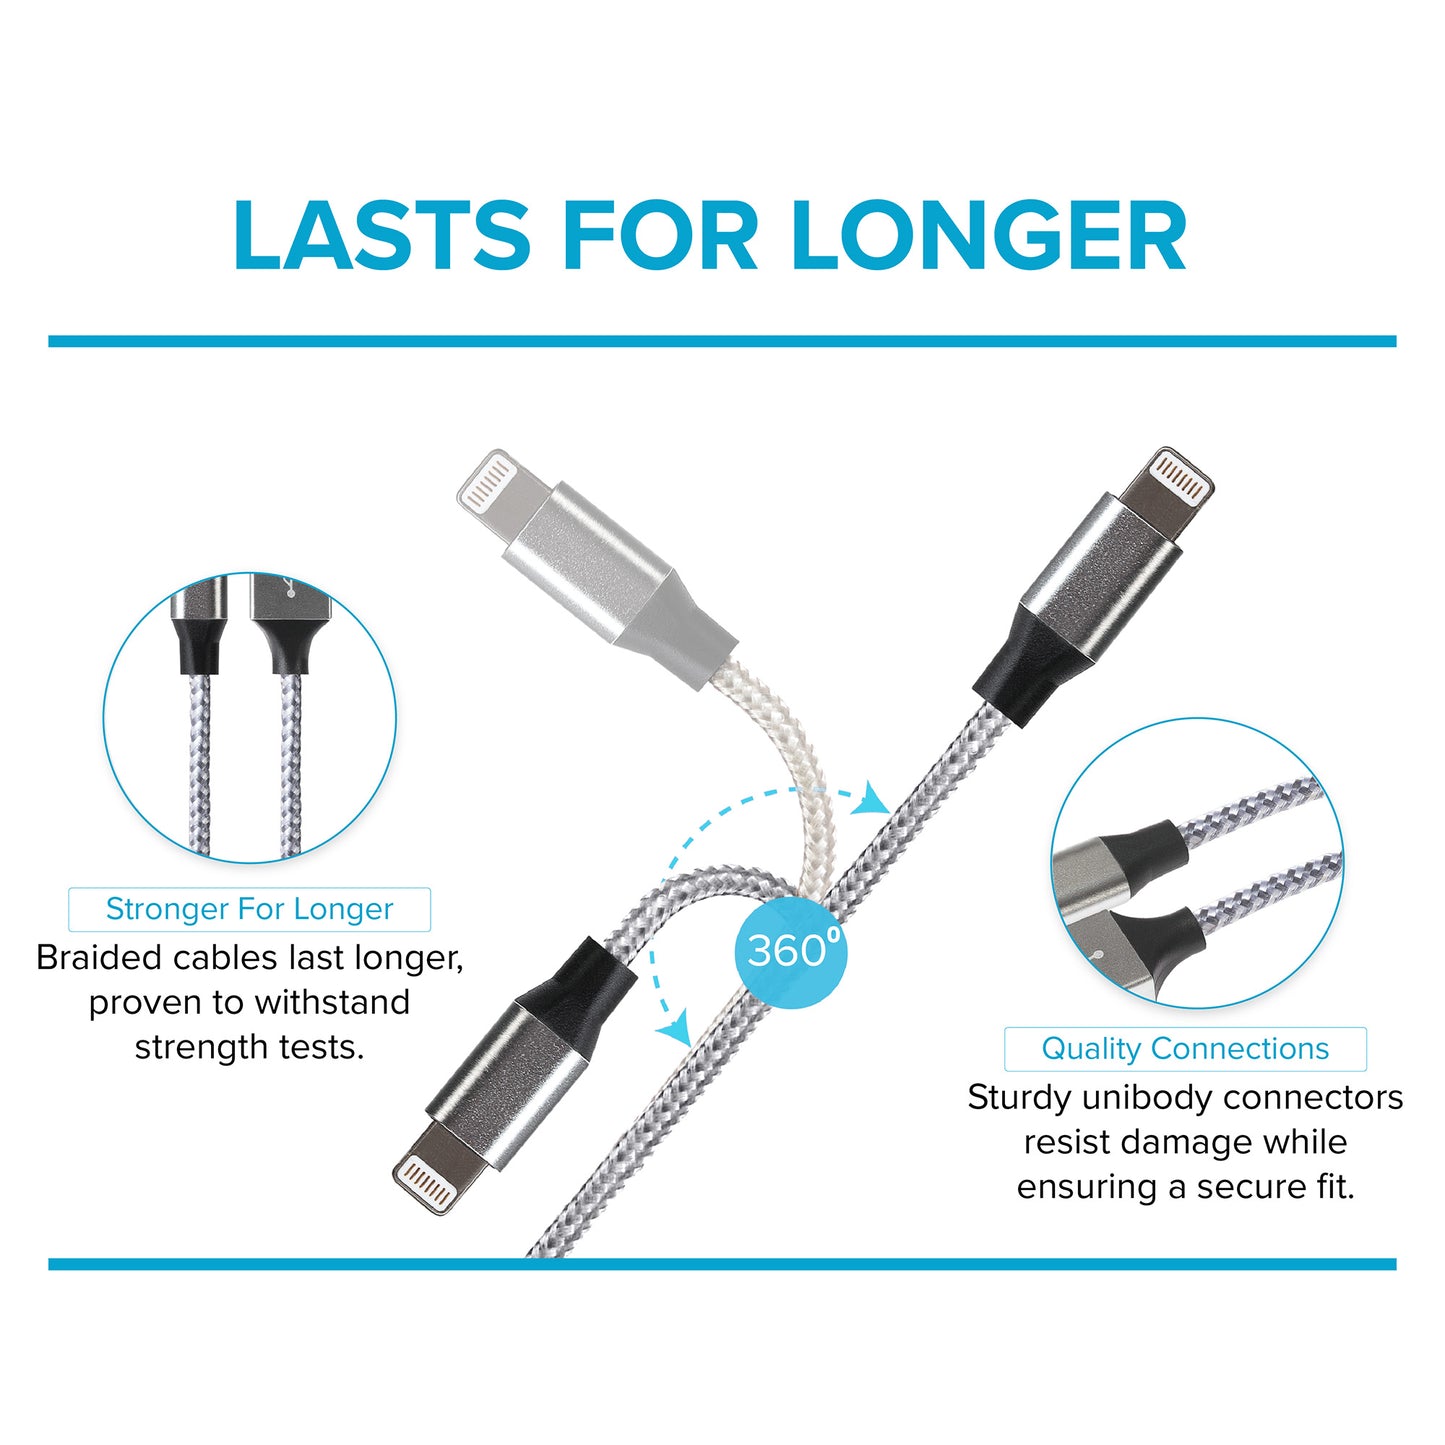 Maplin Pro Lightning to USB-C 20W Fast Charging Braided Cable - Silver, 2m - maplin.co.uk